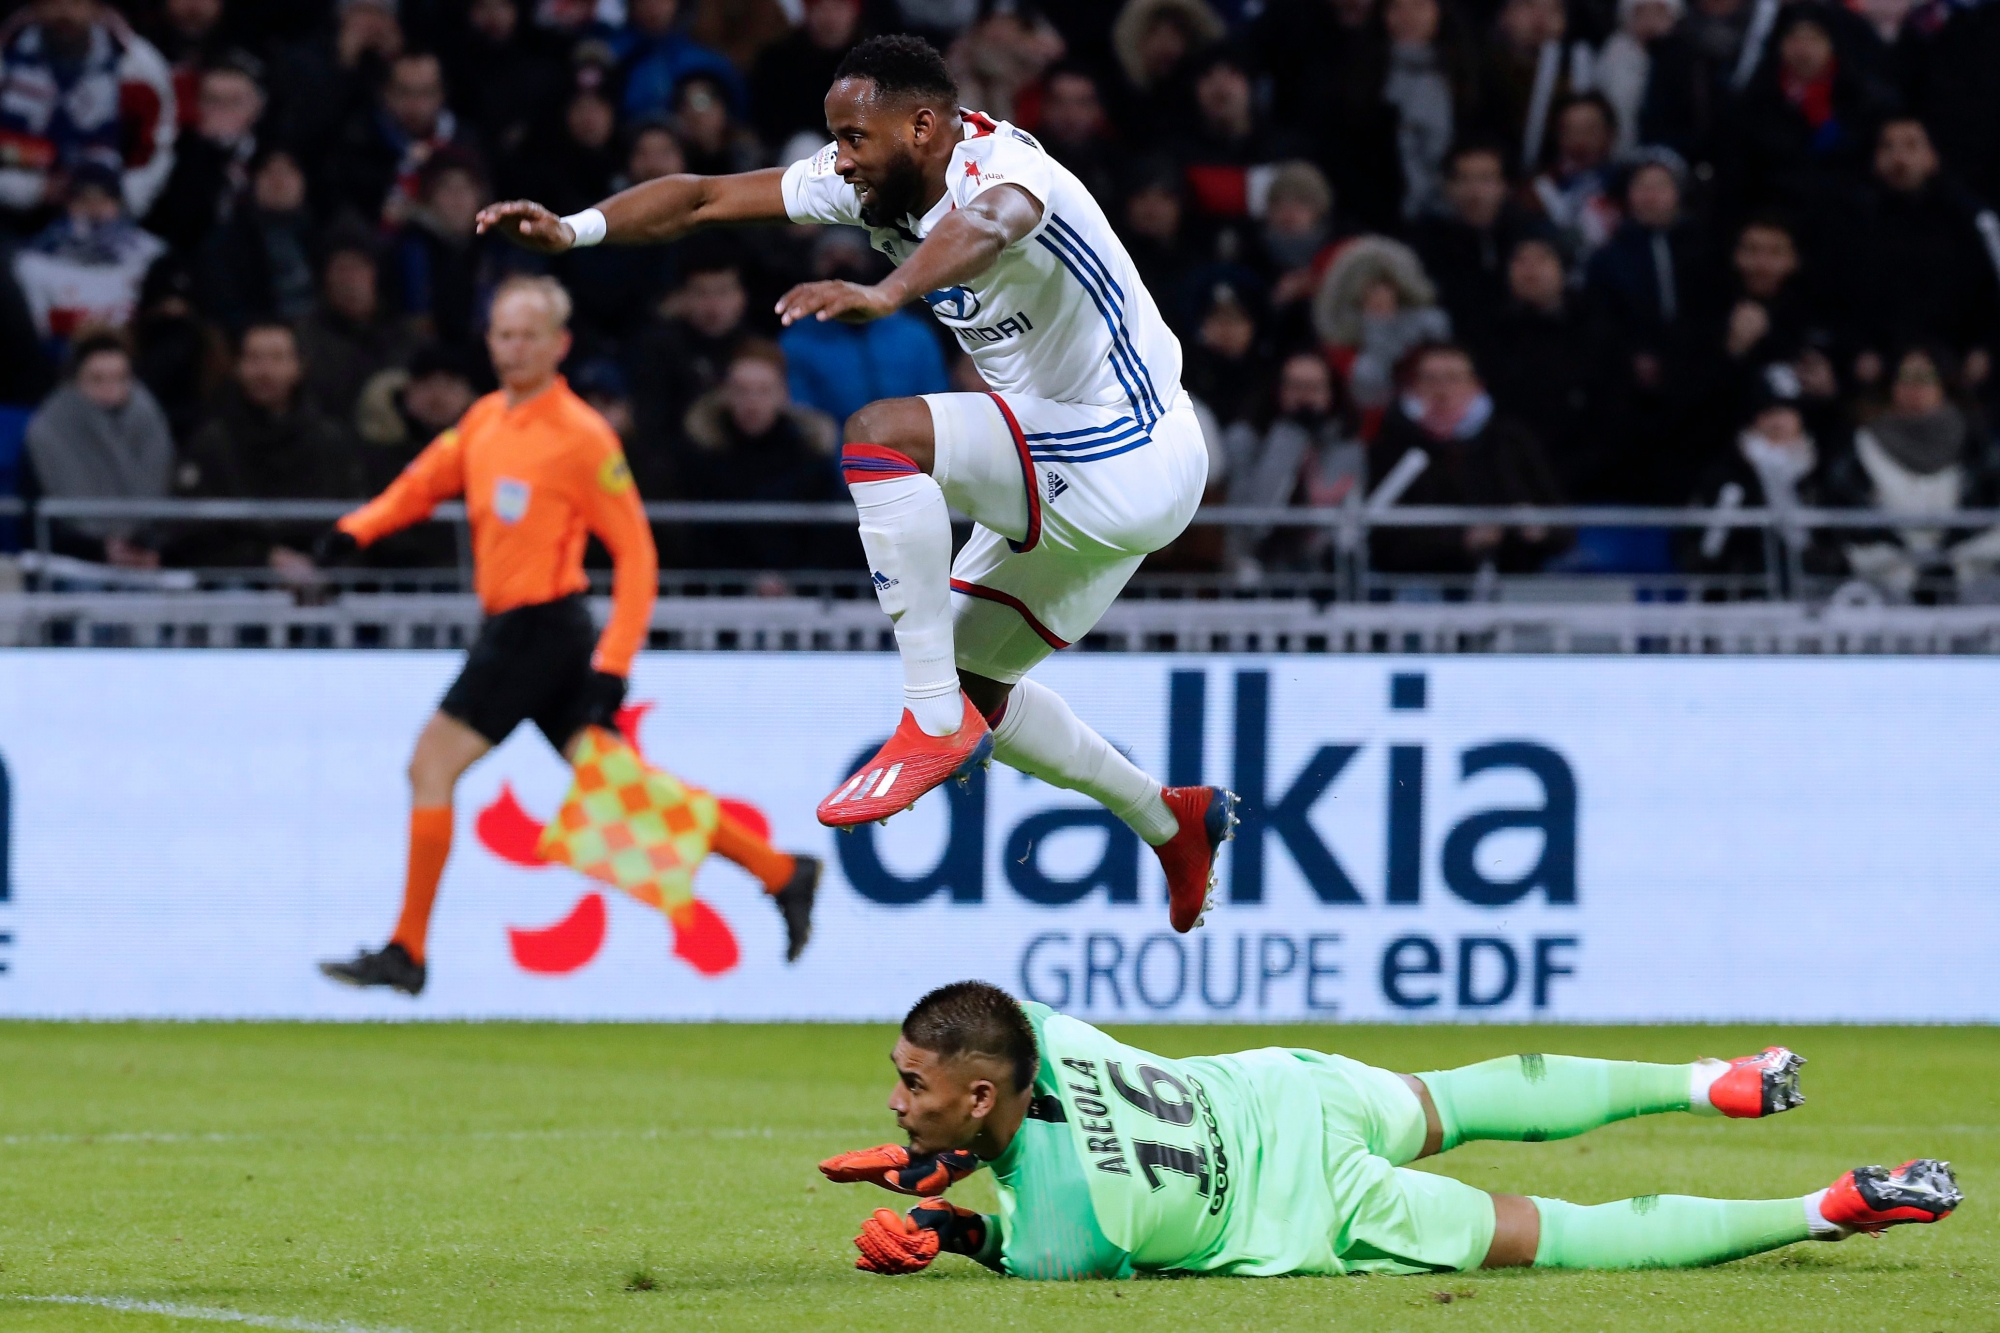 epa07341210 Paris Saint Germain goalkeeper Alphonse Areola (down) and Moussa Dembele (up) of Lyon in action during the French Ligue 1 soccer match between Olympique Lyon and Paris Saint Germain (PSG) at Parc Olympique Lyonnais stadium in Lyon, France, 03 February 2019. EPA/SEBASTIEN NOGIER FRANKREICH FUSSBALL LIGUE 1